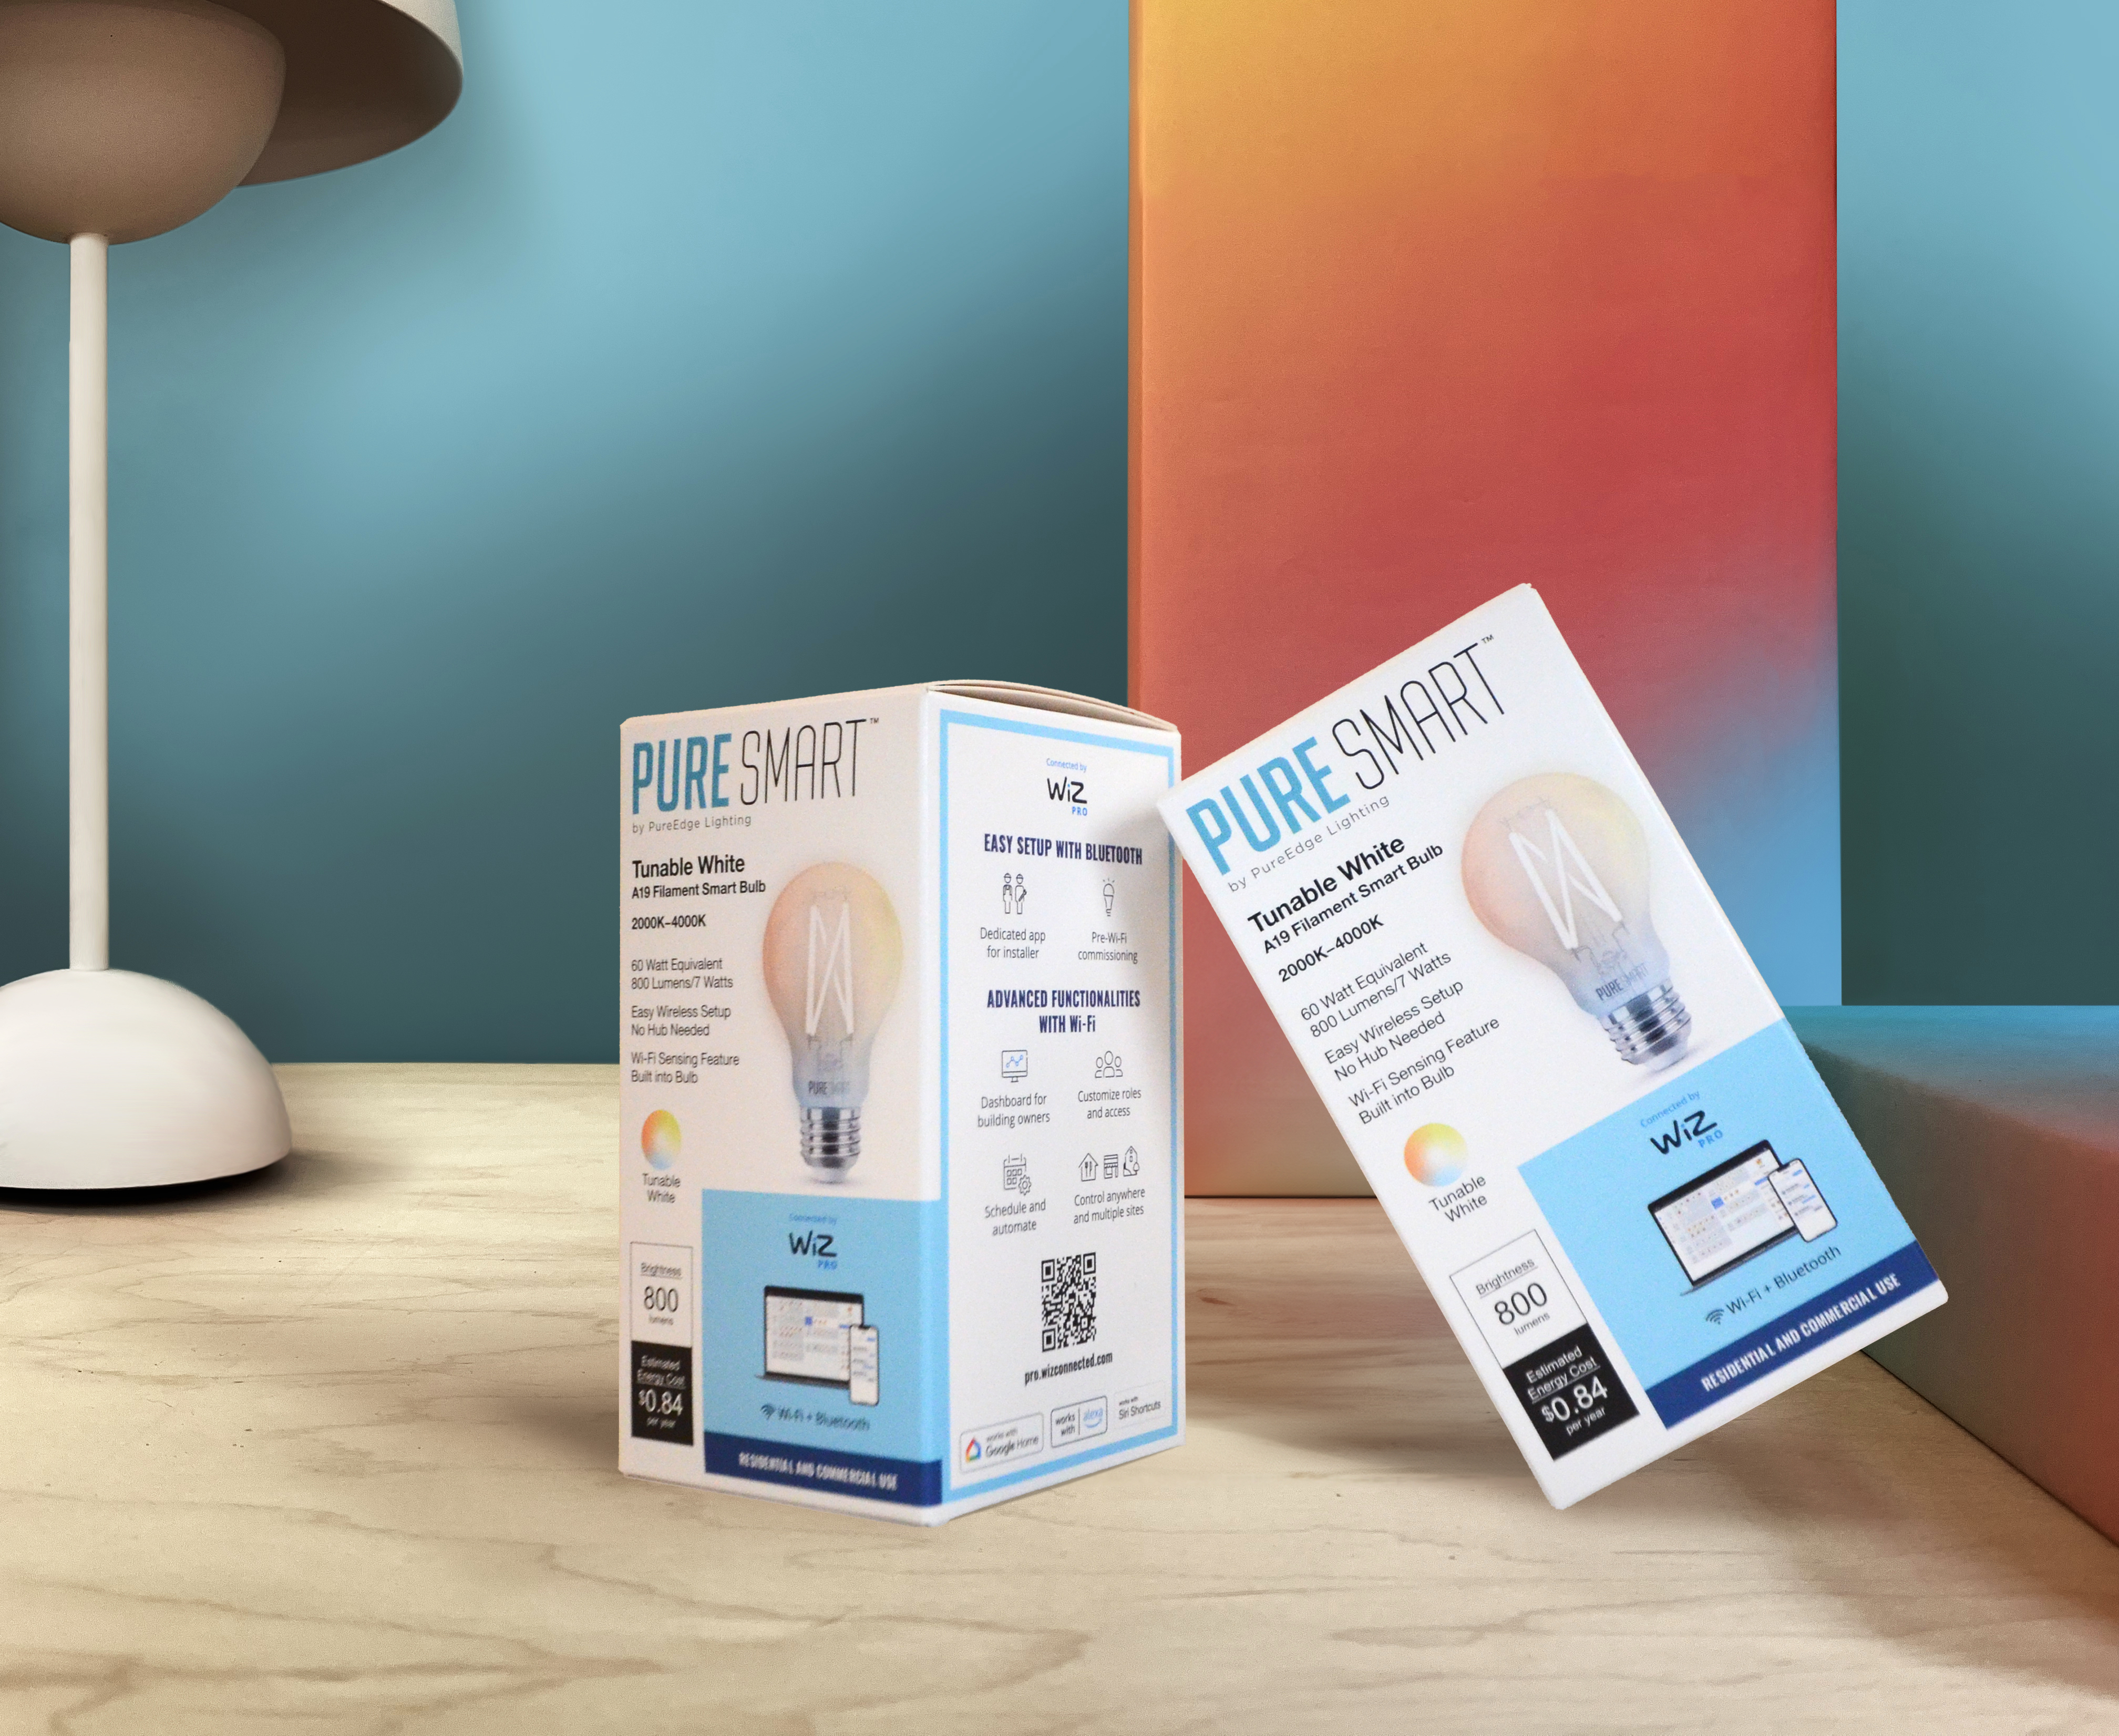 Two Pure Smart™ Tunable White A19 Filament Bulbs